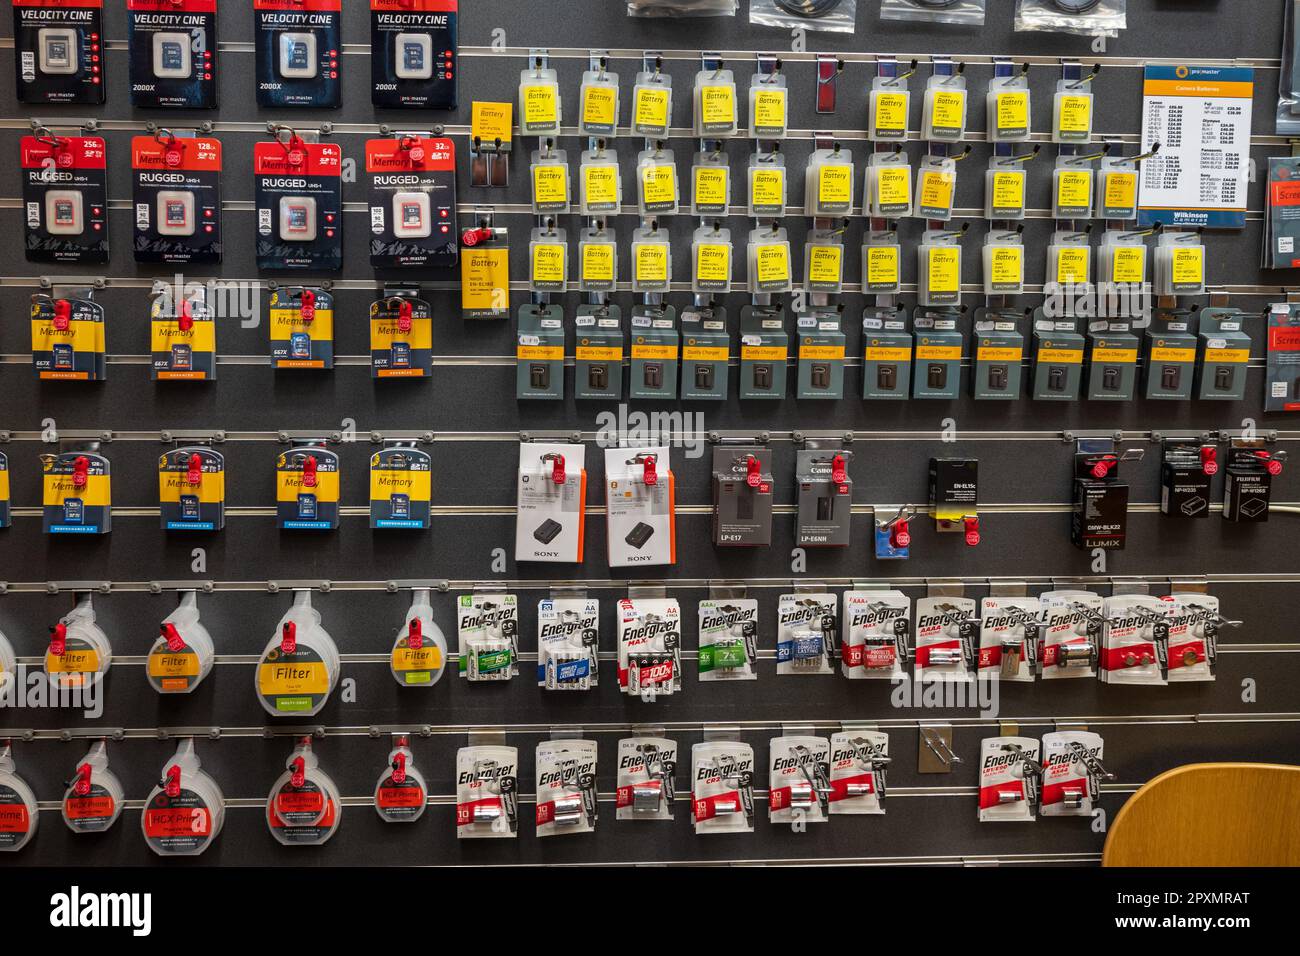 Goods on display in racks on the wall in a camera shop. Stock Photo